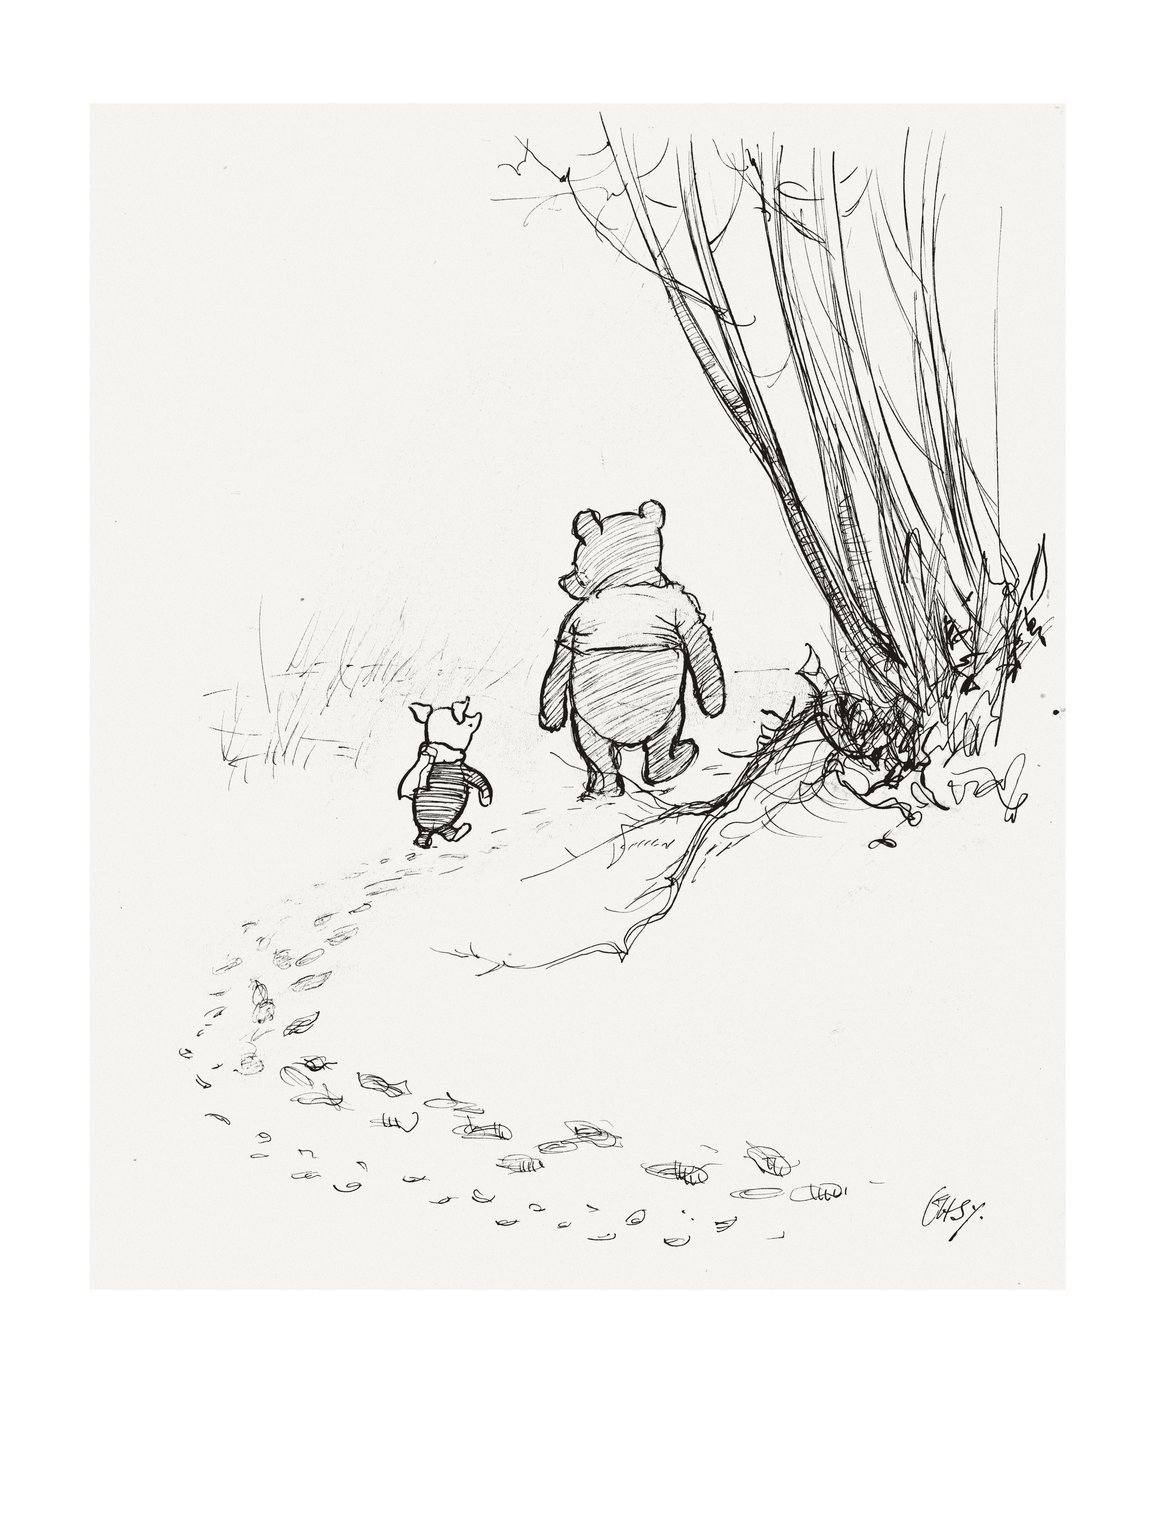 Forgotten Winnie-the-Pooh Sketch Found Wrapped in an Old Tea Towel, Smart  News